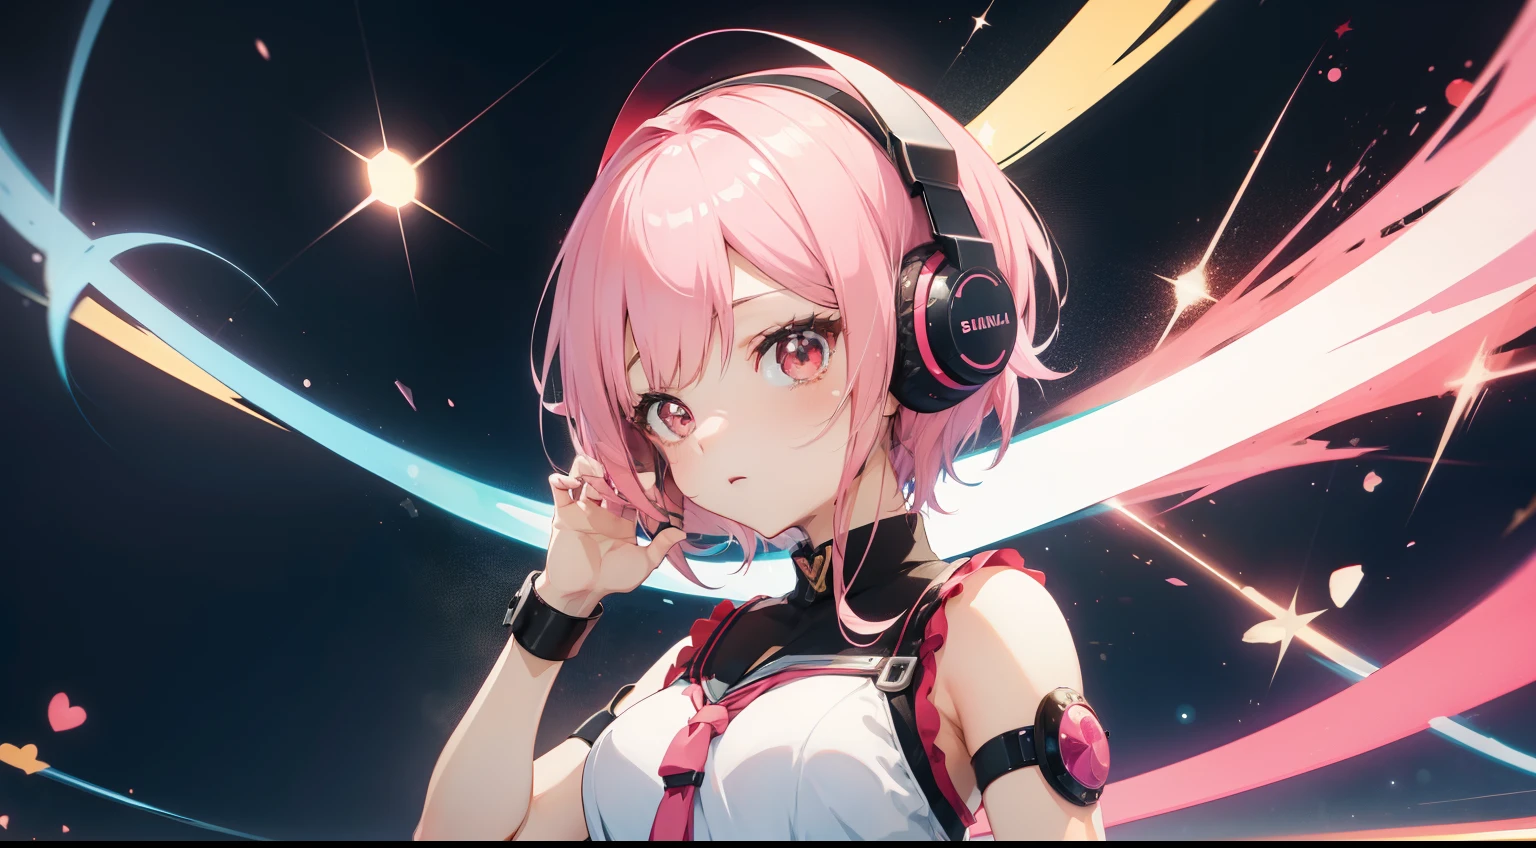 Girl with pink short hairstyle holding microphone in singer、kawaii、headphones、​masterpiece、high-level image quality、anime style 4 k, Seductive Anime Girl, best anime 4k konachan wallpaper, Anime Girl, Anime art wallpaper 8k, charming anime girls, (Anime Girl), Beautiful anime girl, Cute anime girl, anime wallpaper 4k, anime wallpaper 4 k, High quality anime art style